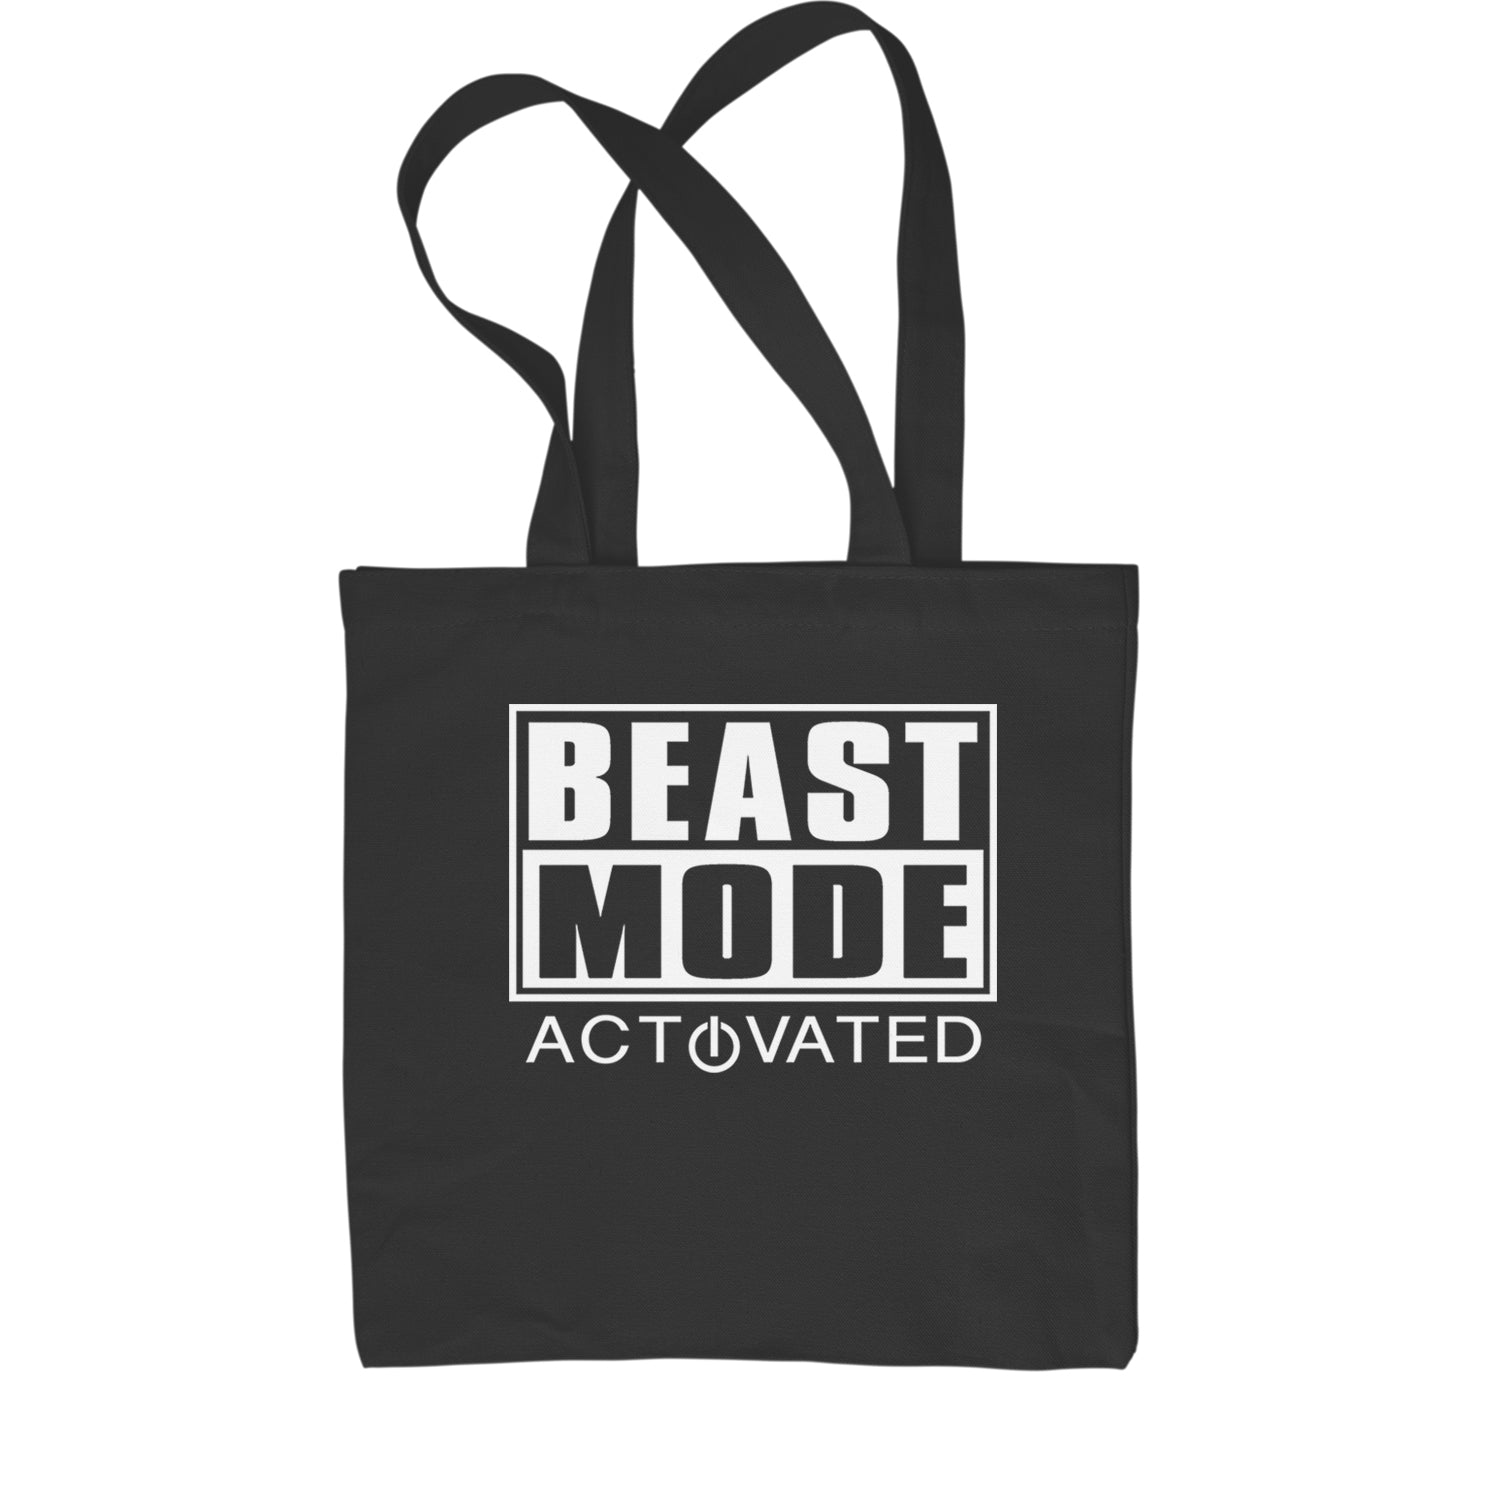 Activated Beast Mode Workout Gym Clothing Shopping Tote Bag